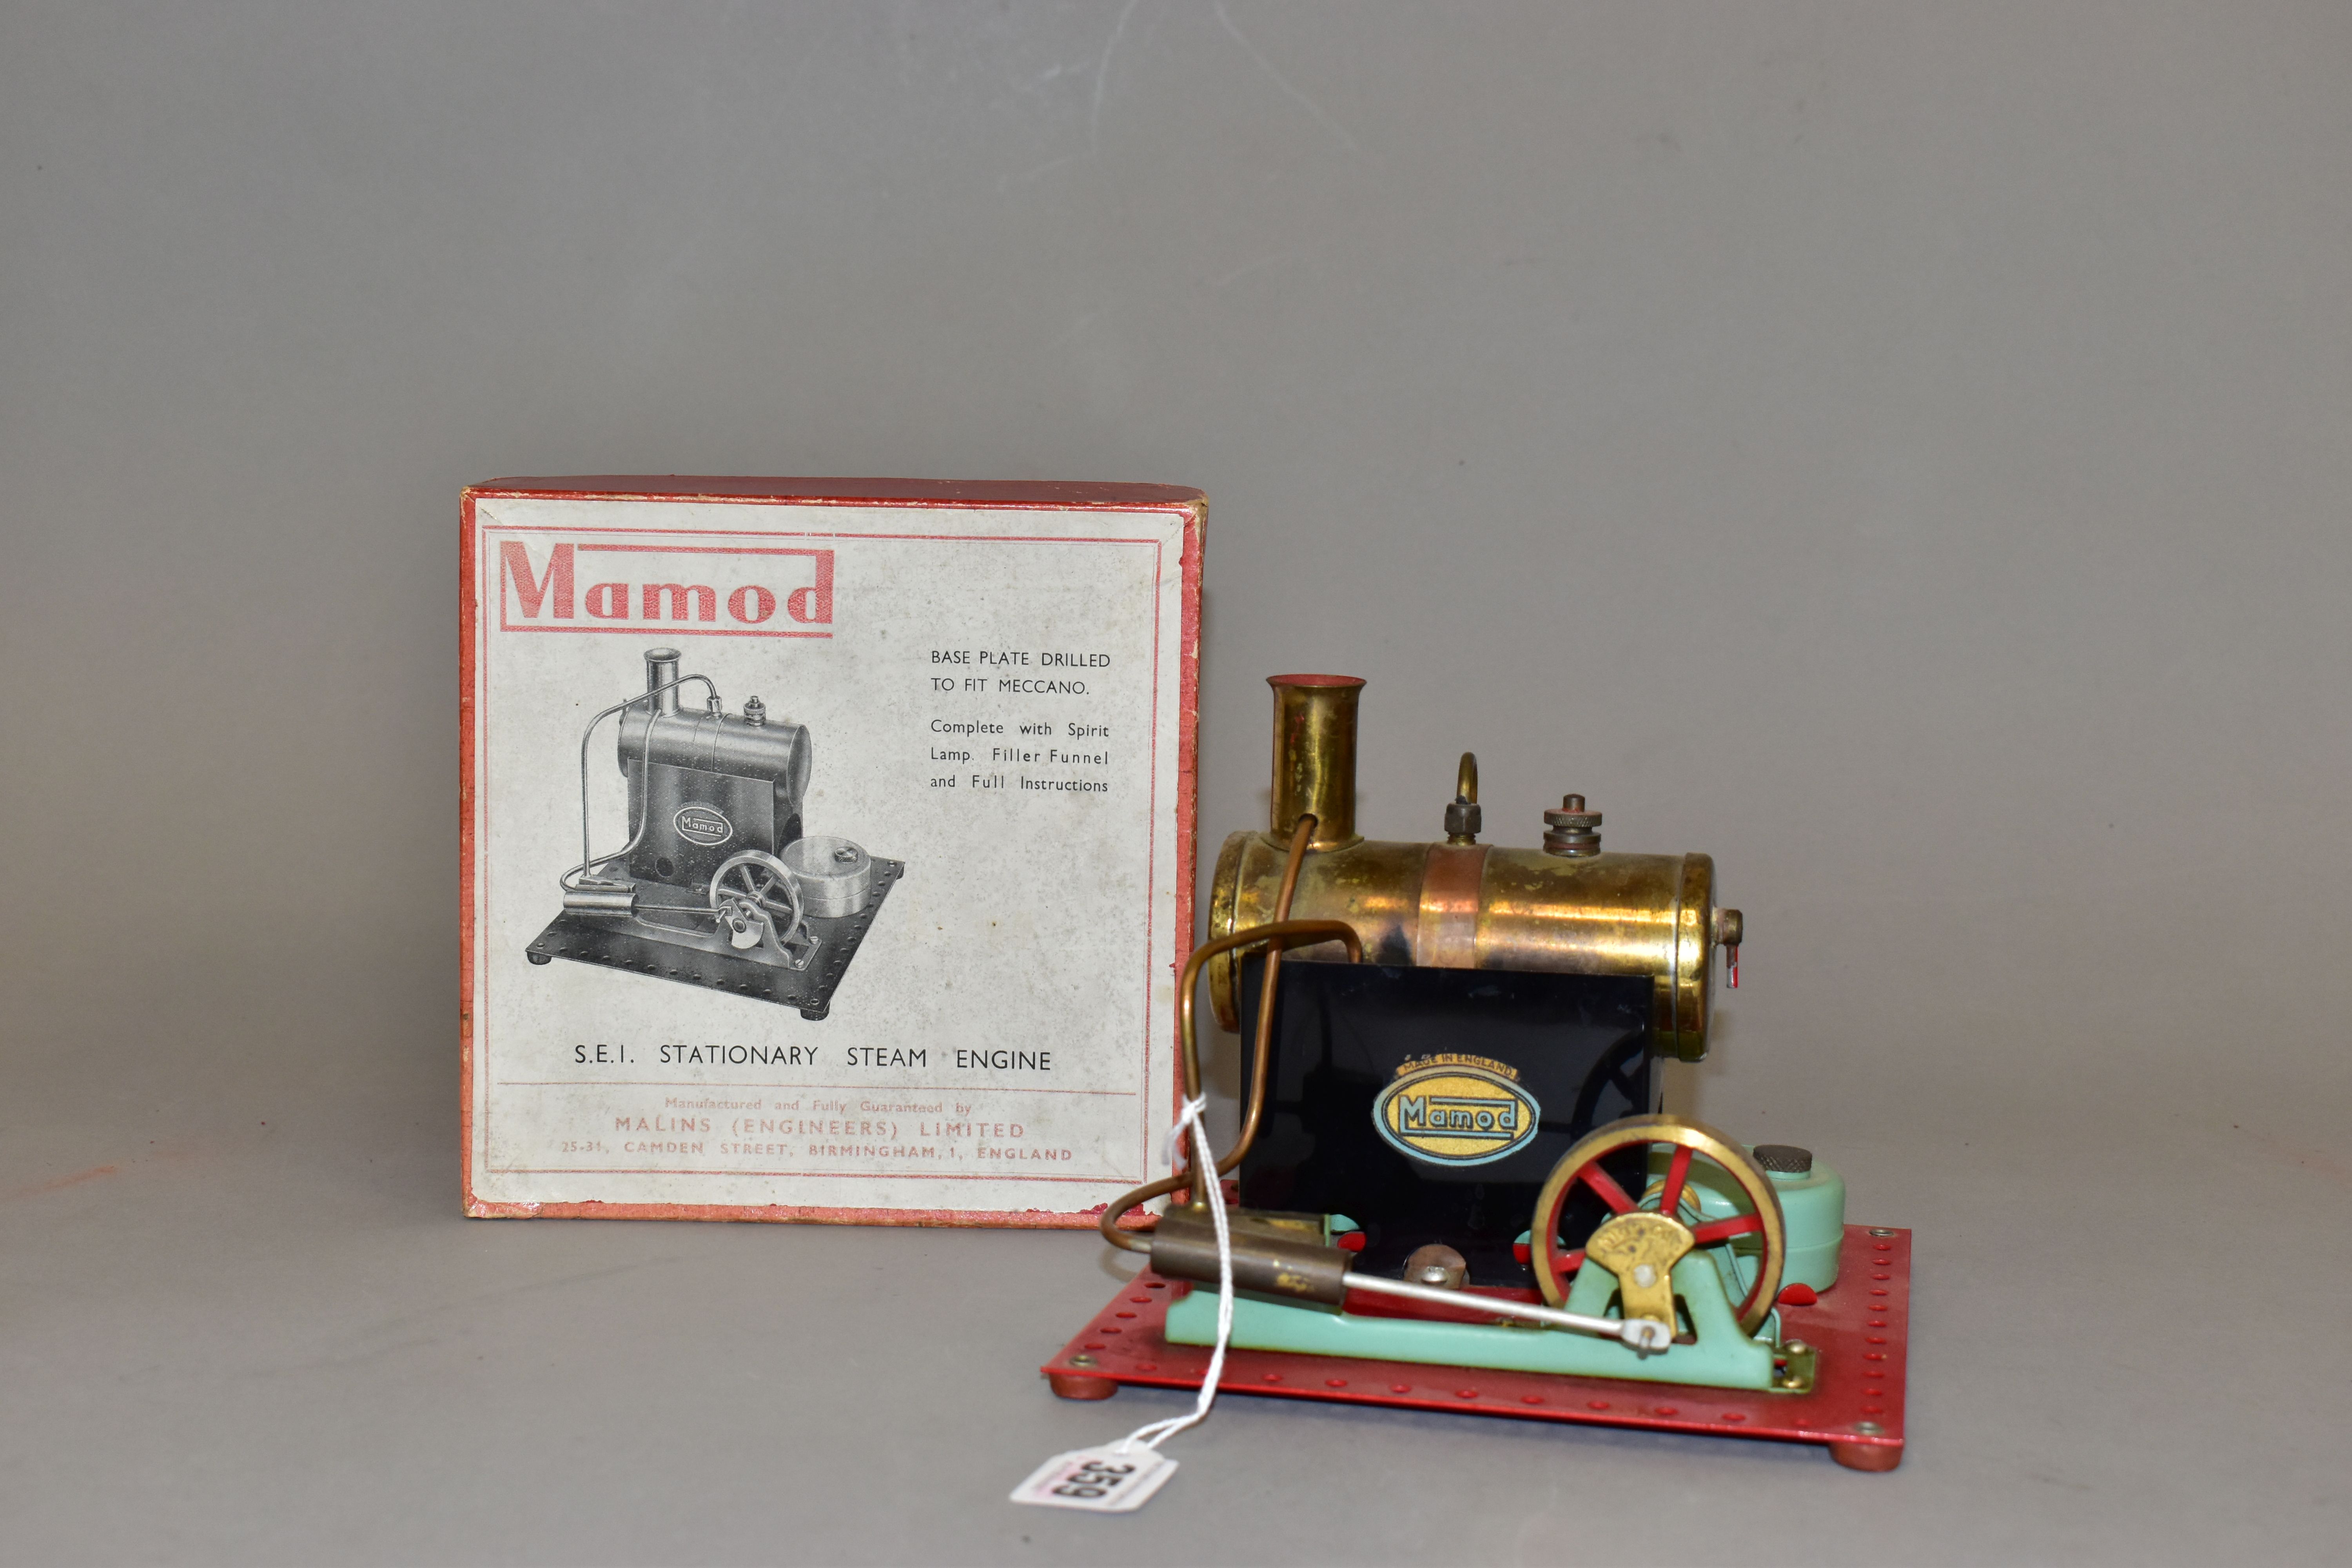 A BOXED MAMOD LIVE STEAM STATIONARY ENGINE, No.S.E.1., not tested, appears largely complete with